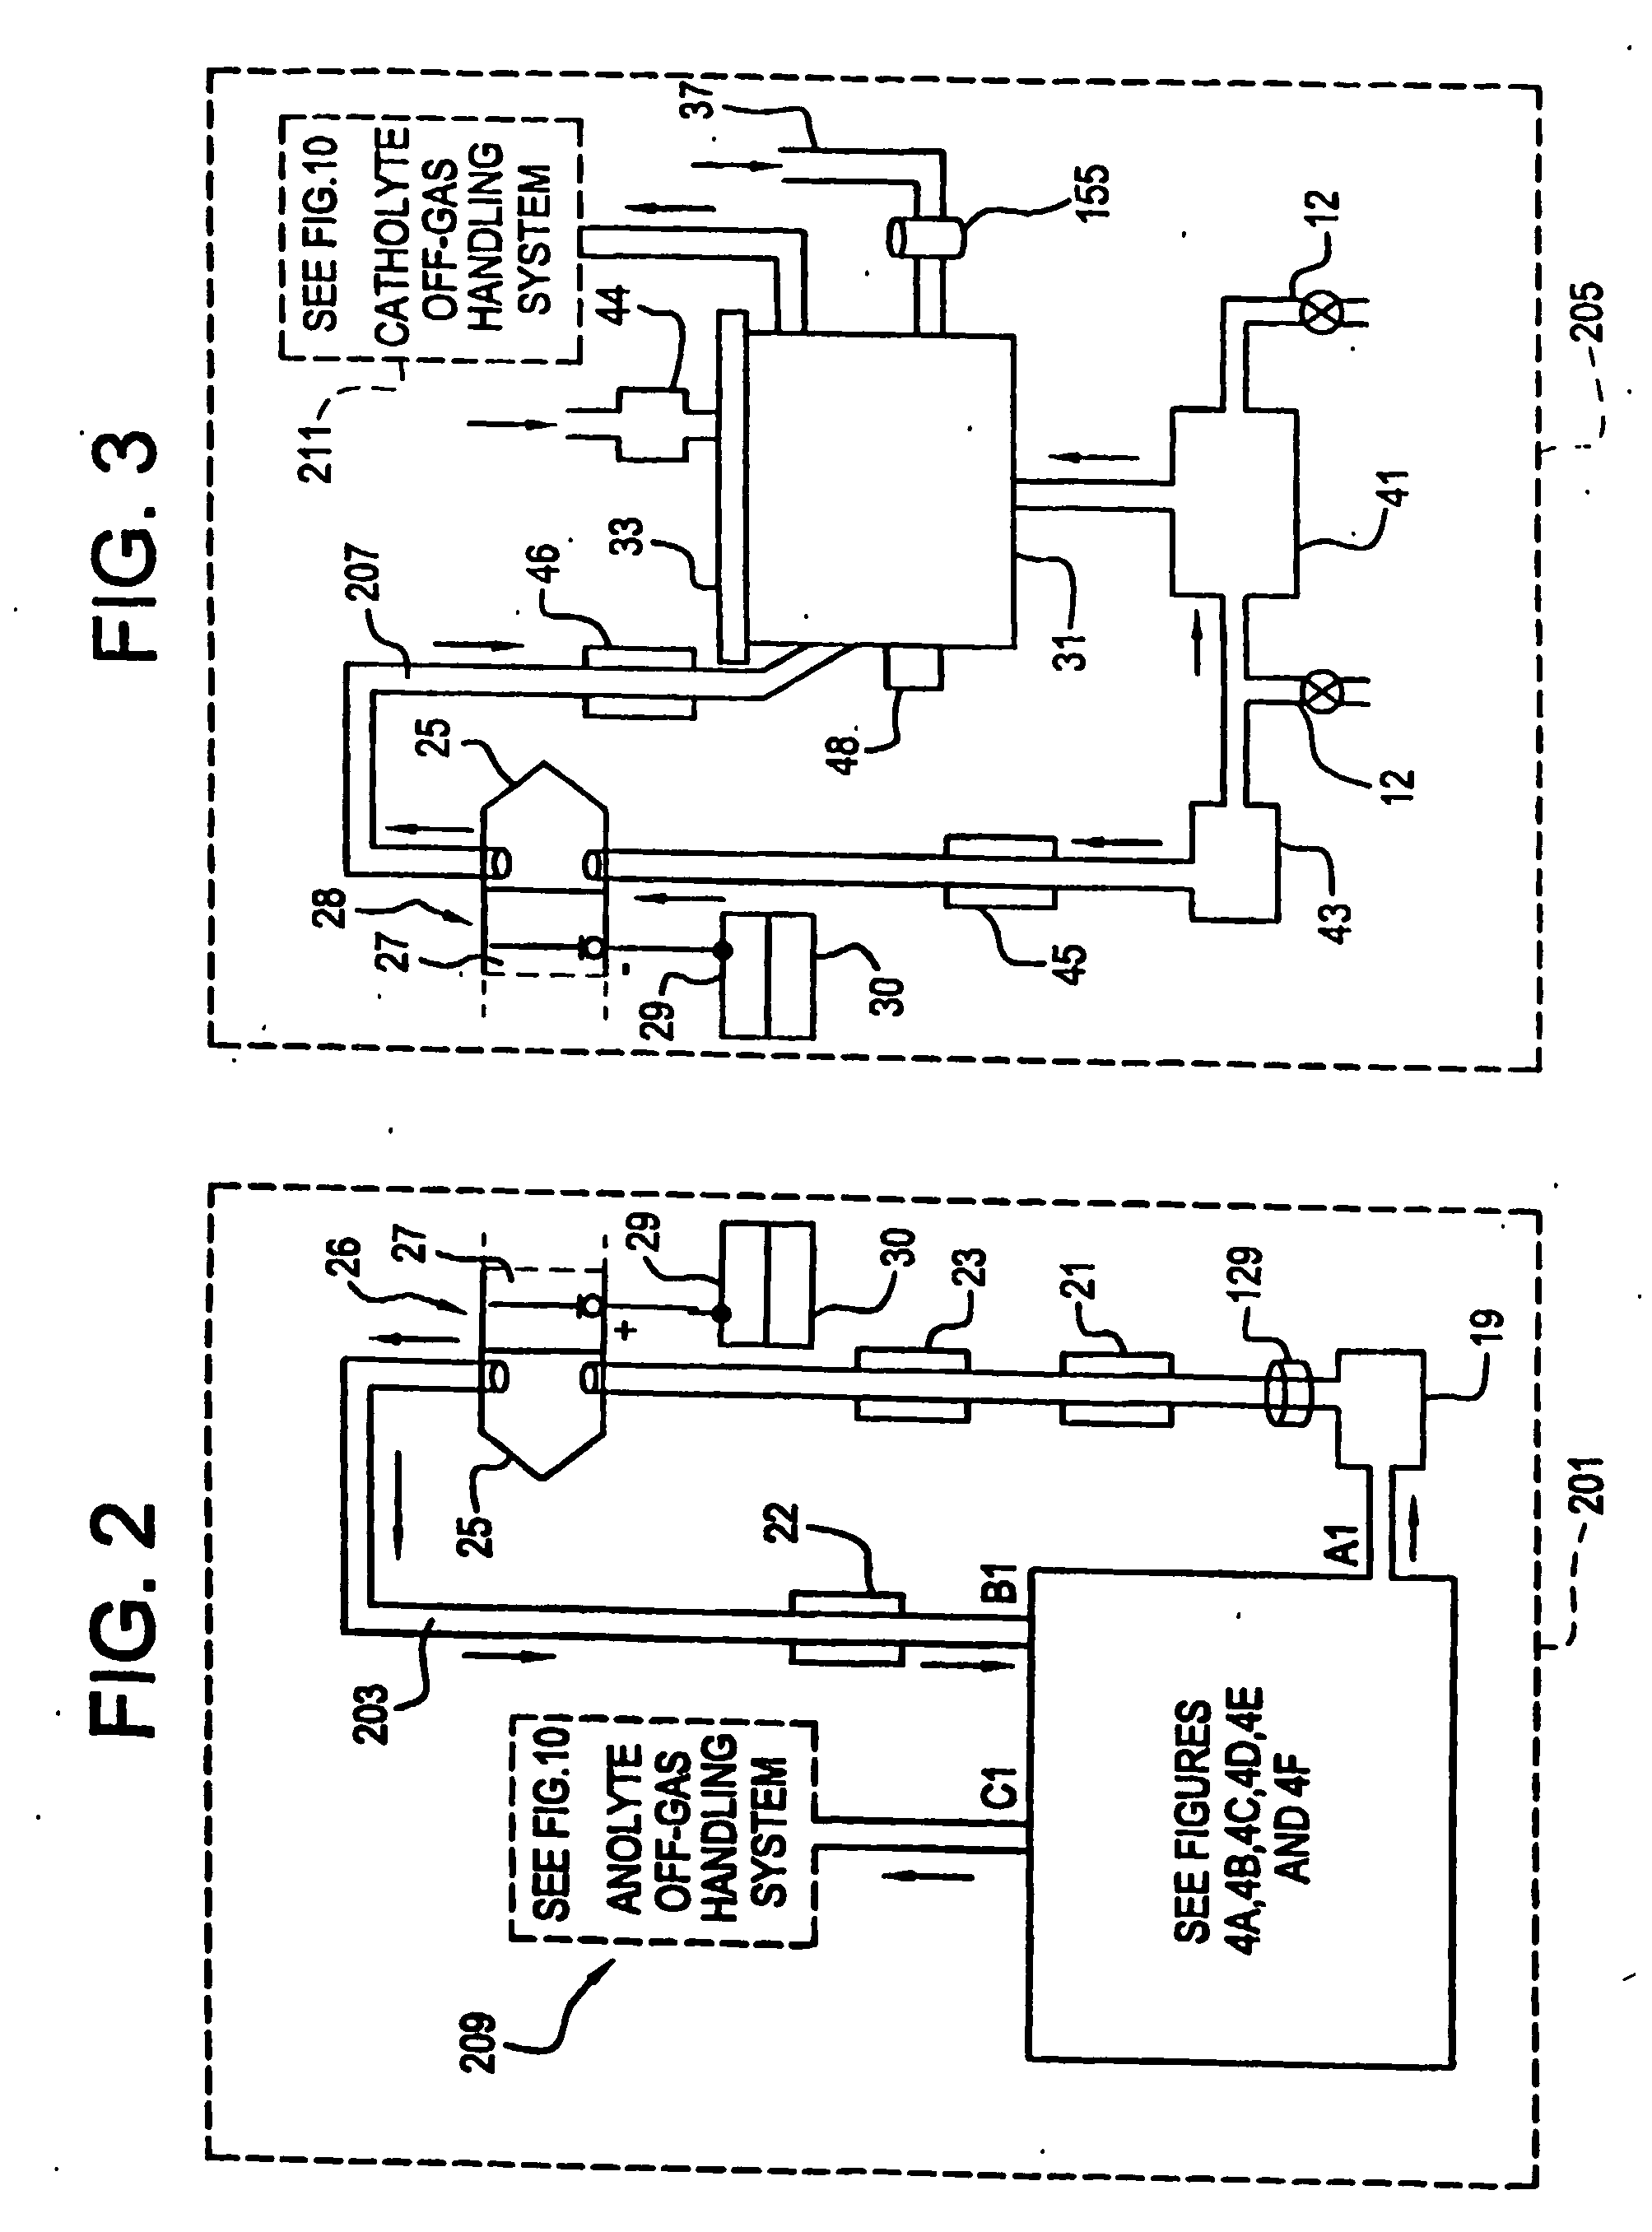 Apparatus and process for mediated electrochemical oxidation of materials